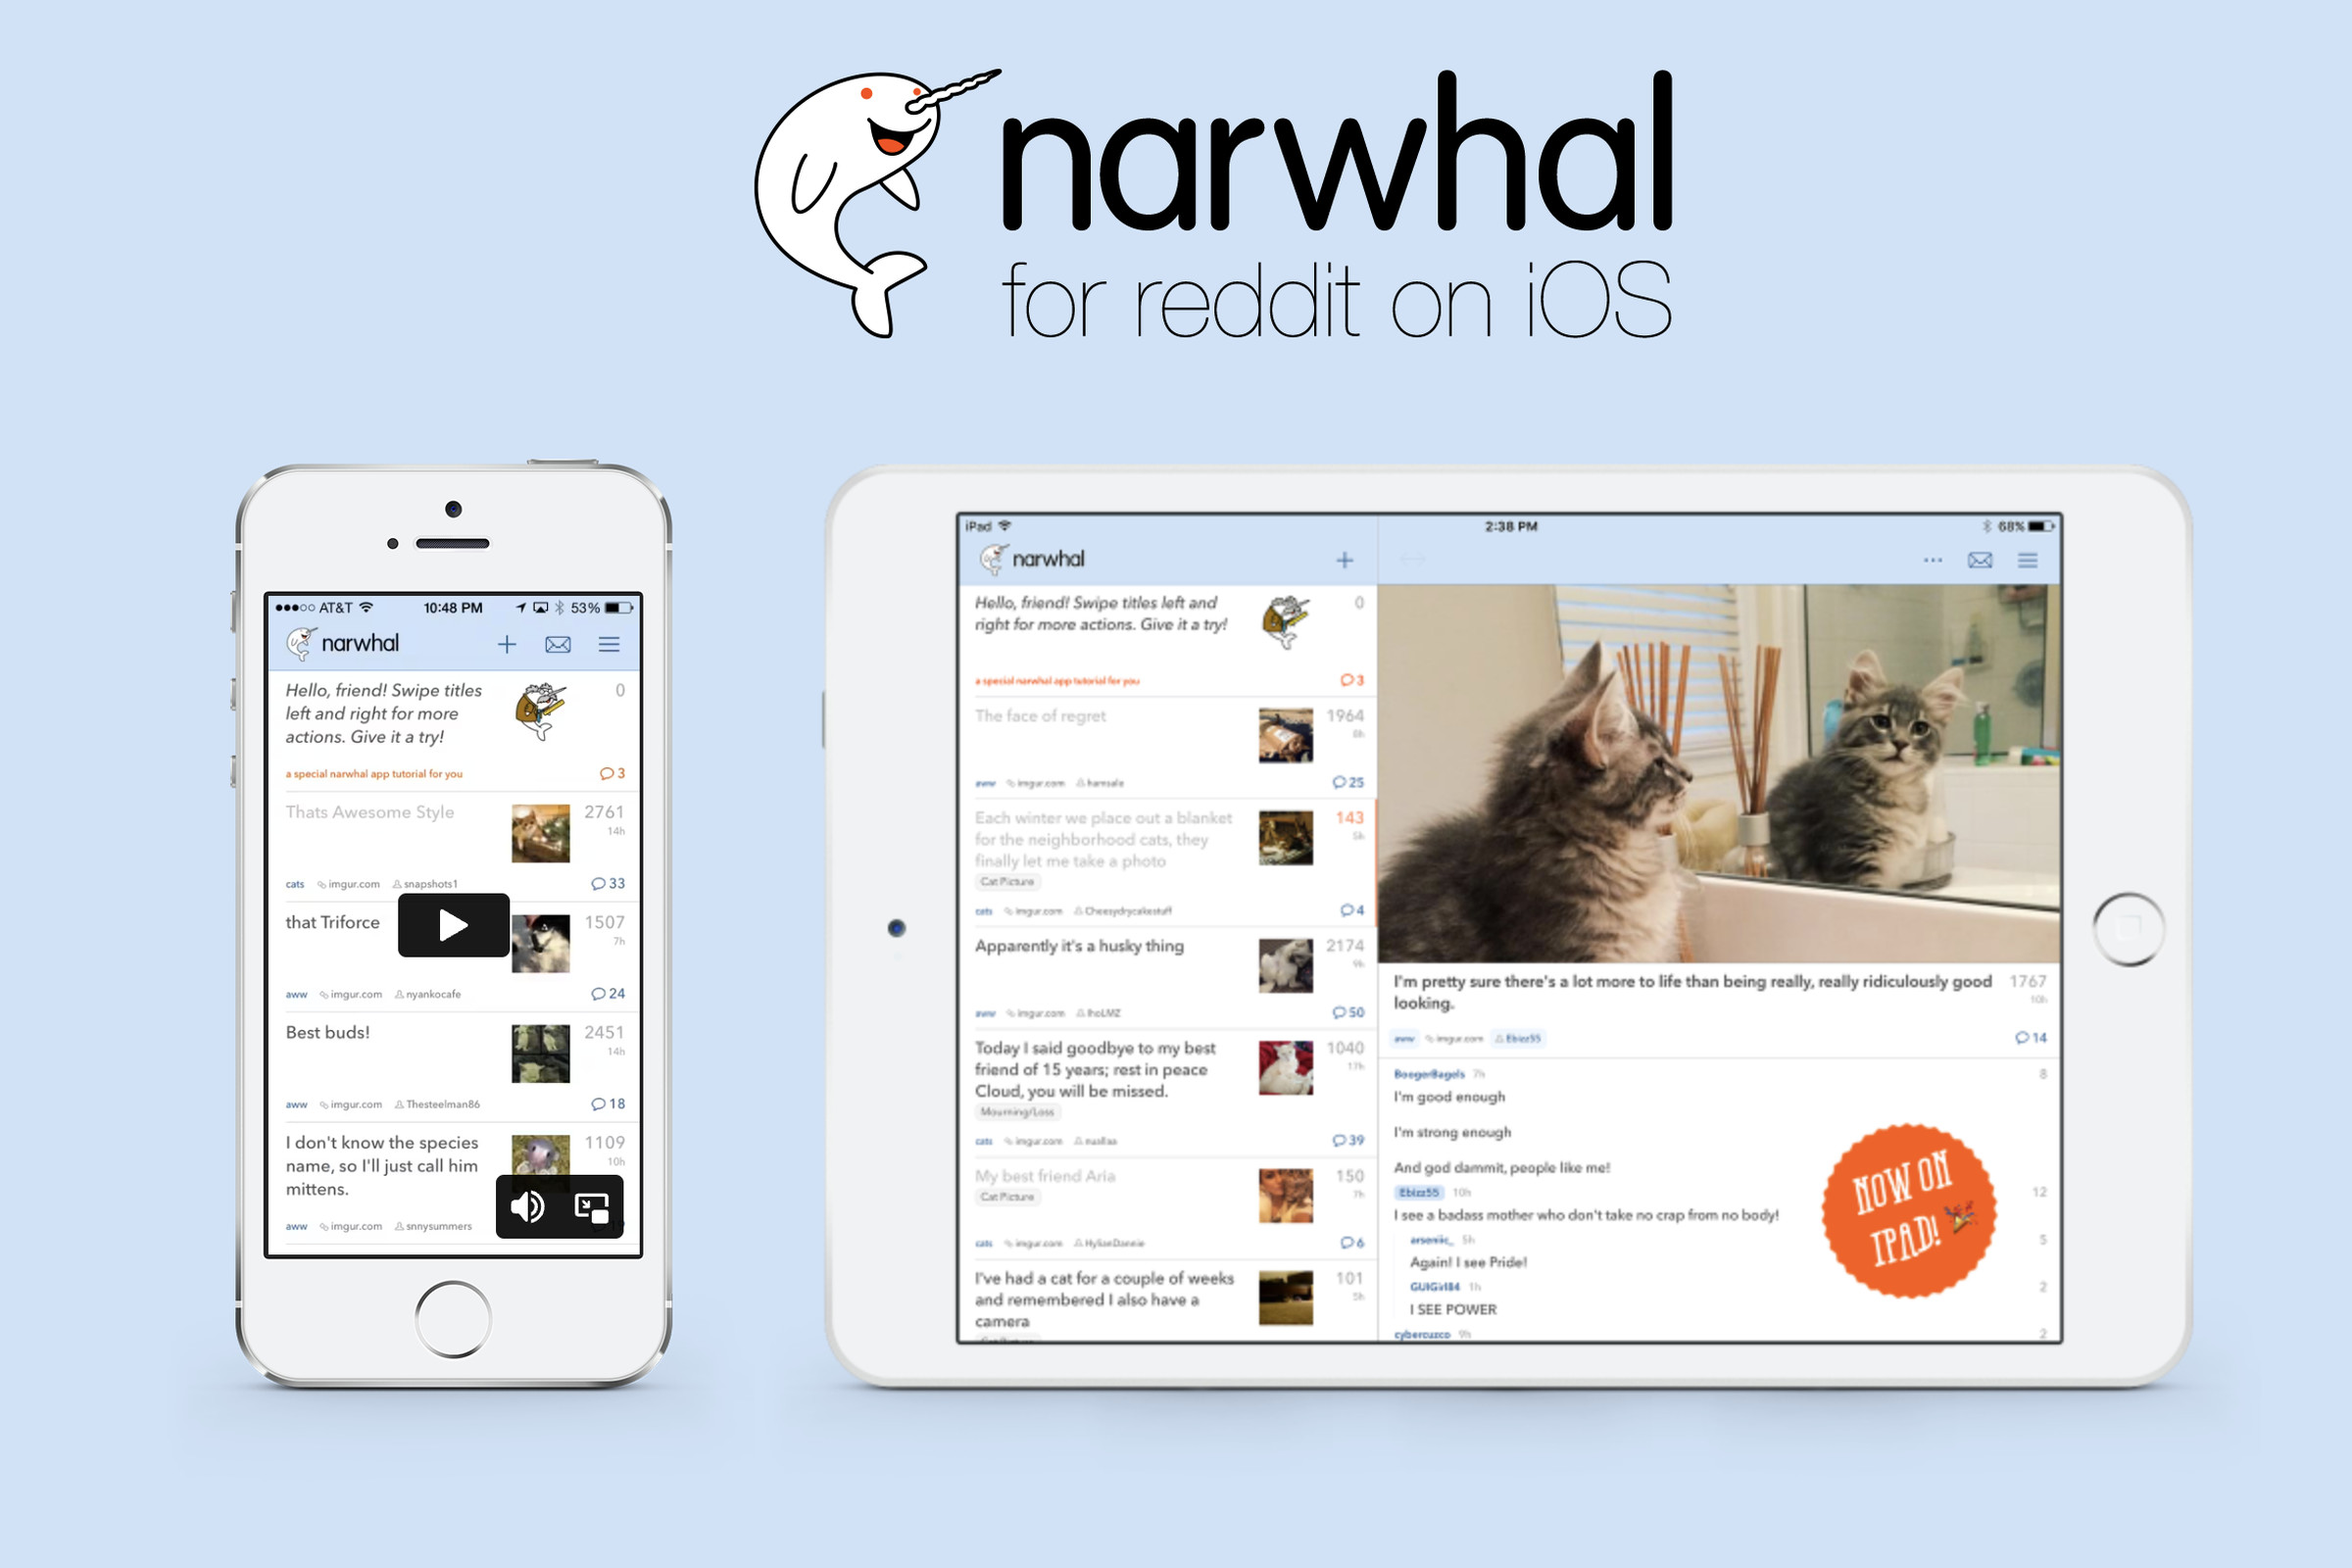 A promotional image for Narwhal featuring on older iPhone and an older iPad.